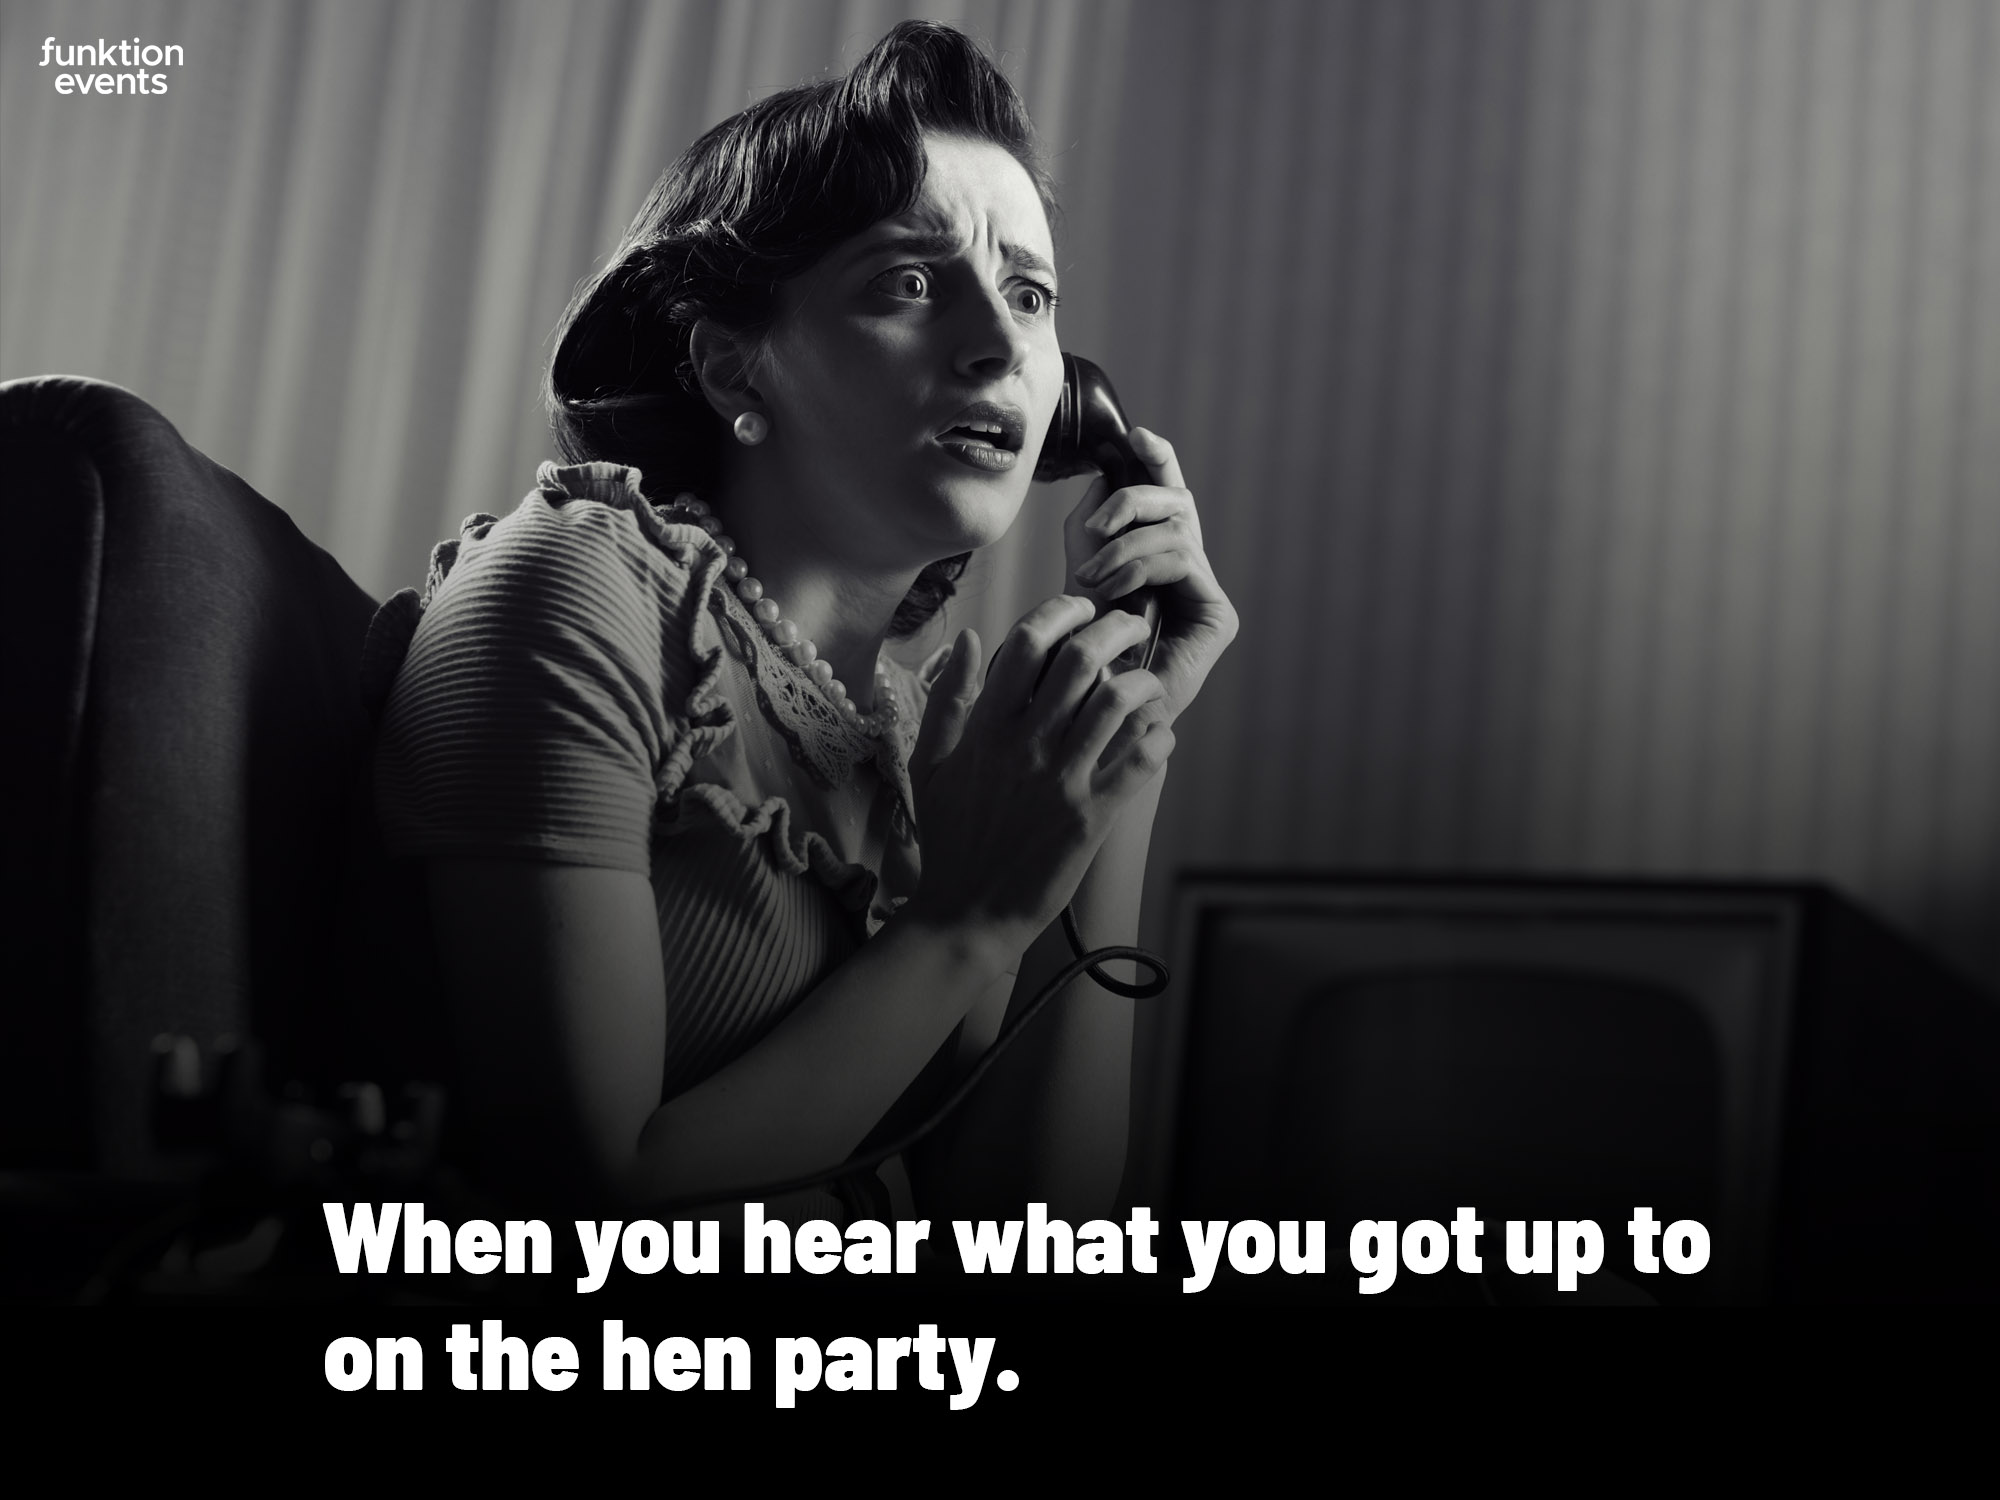 When you hear what you got up to on the hen party - Meme 2